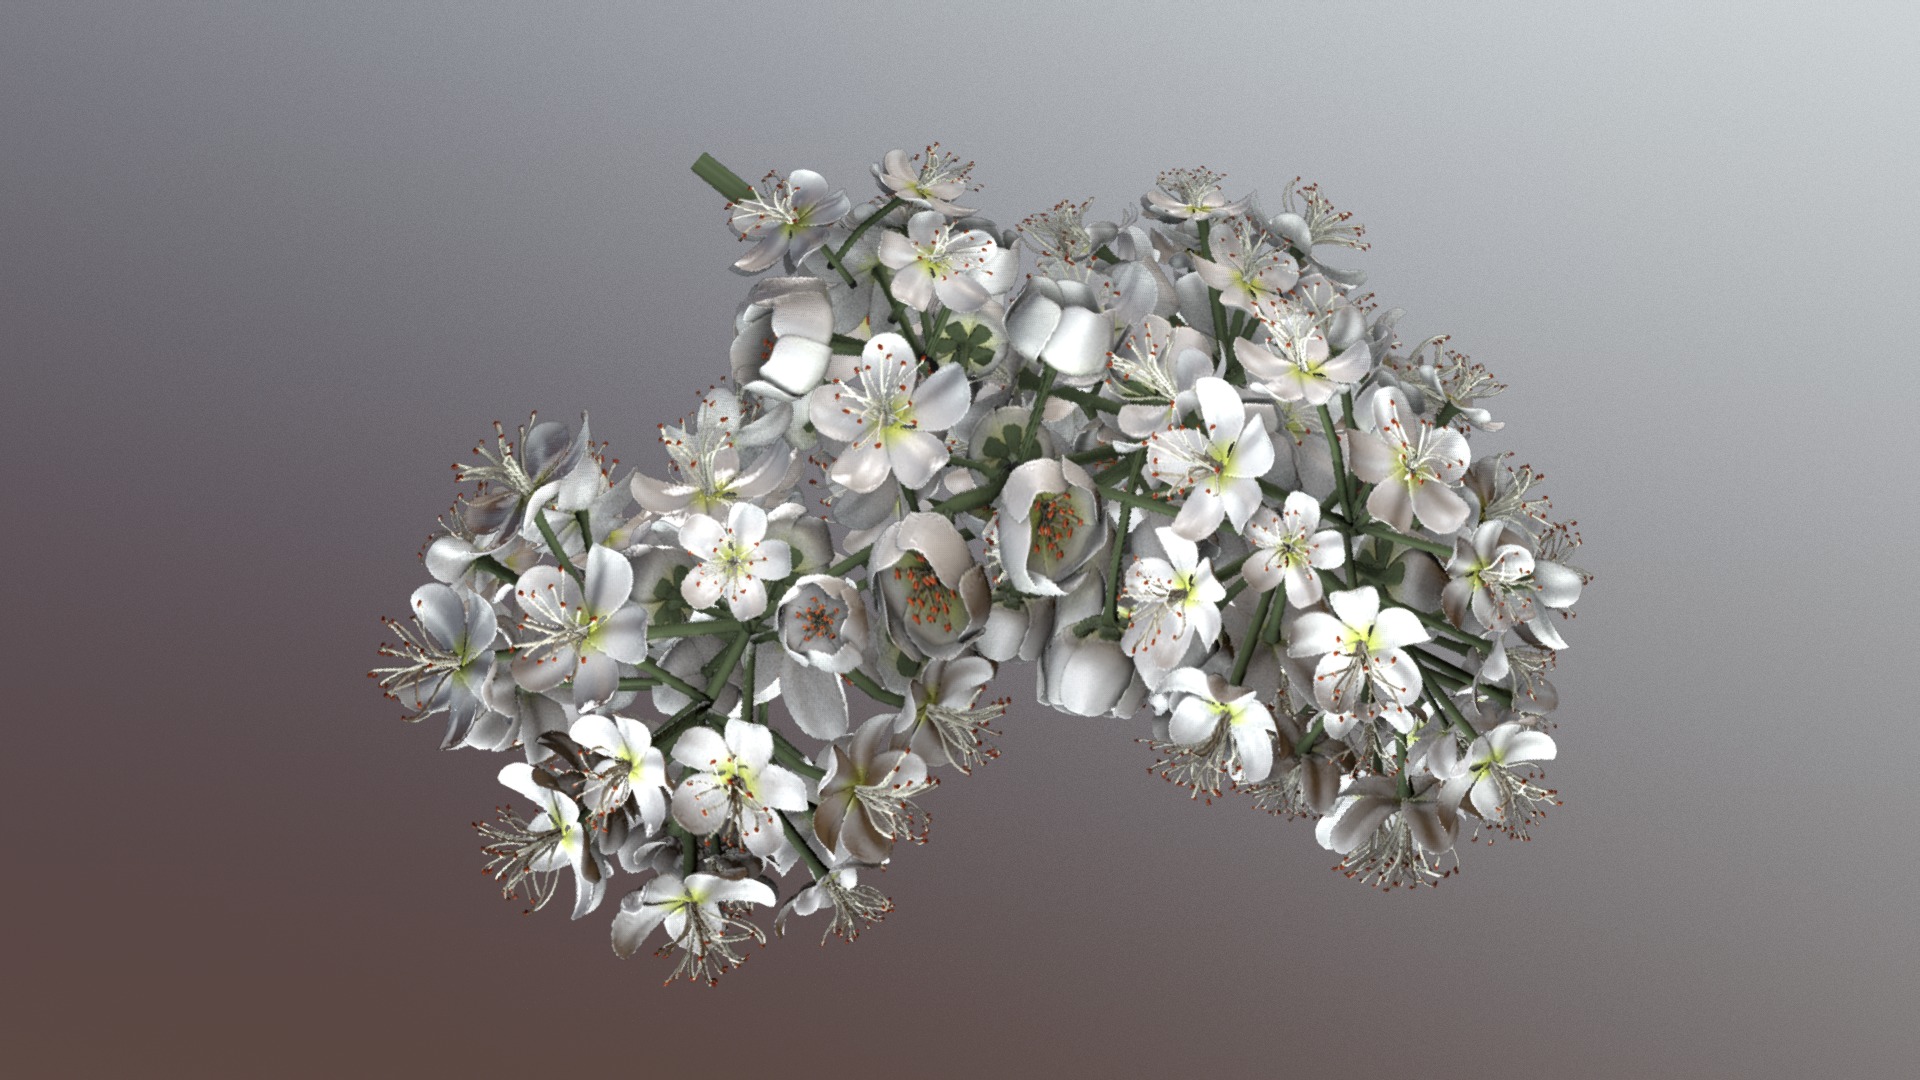 3D model Blossom of a Rowan Low-Poly - This is a 3D model of the Blossom of a Rowan Low-Poly. The 3D model is about a white flower with green leaves.